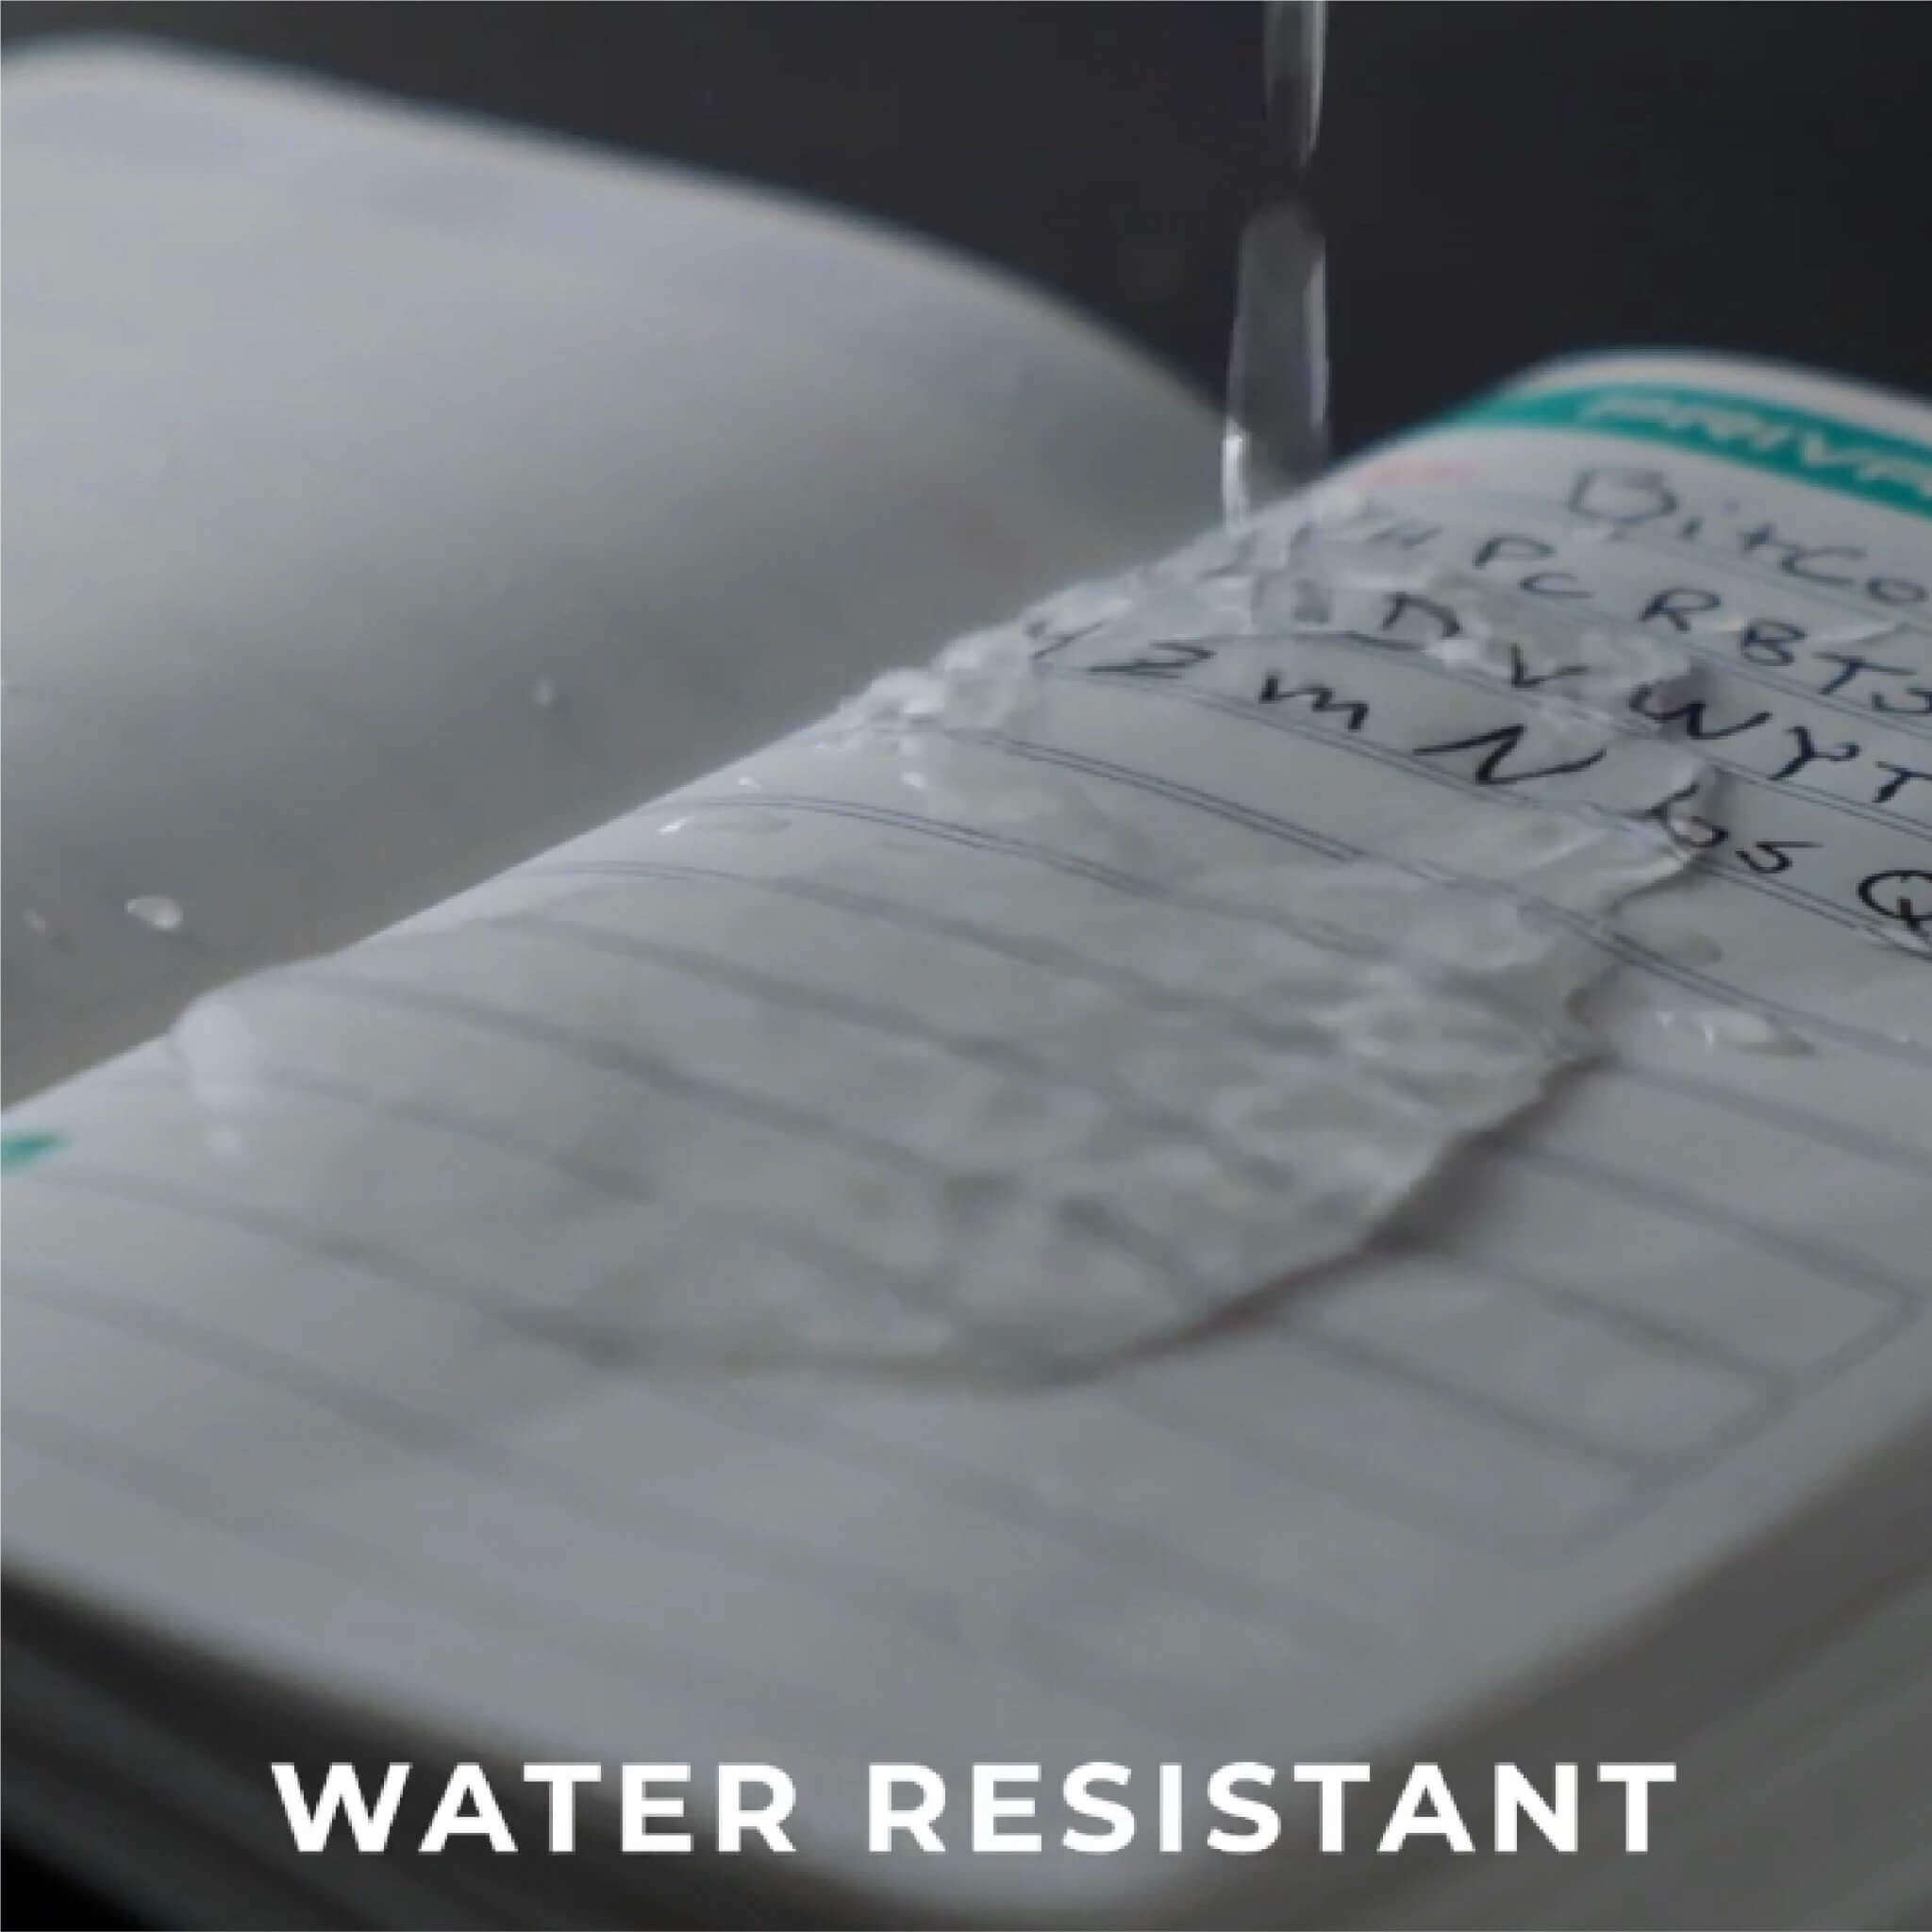 Water splashing on stonebook pages to demonstrate its waterproof to withstand floods